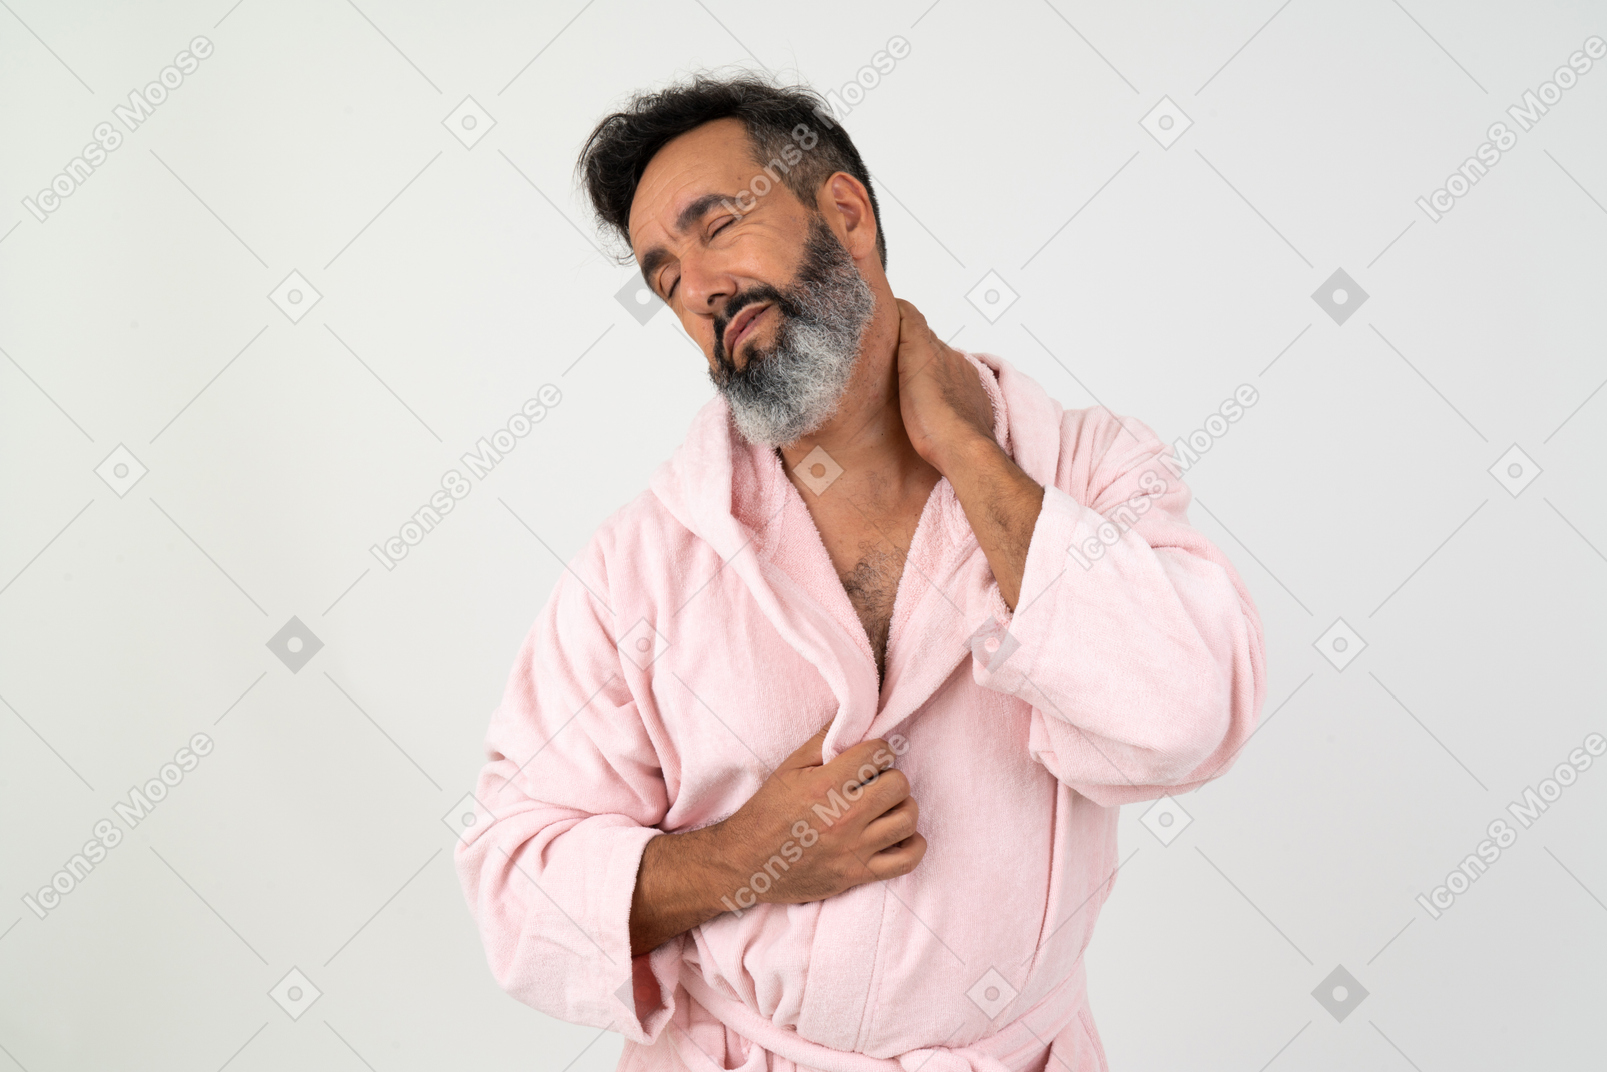 Neck ache causes me great discomfort